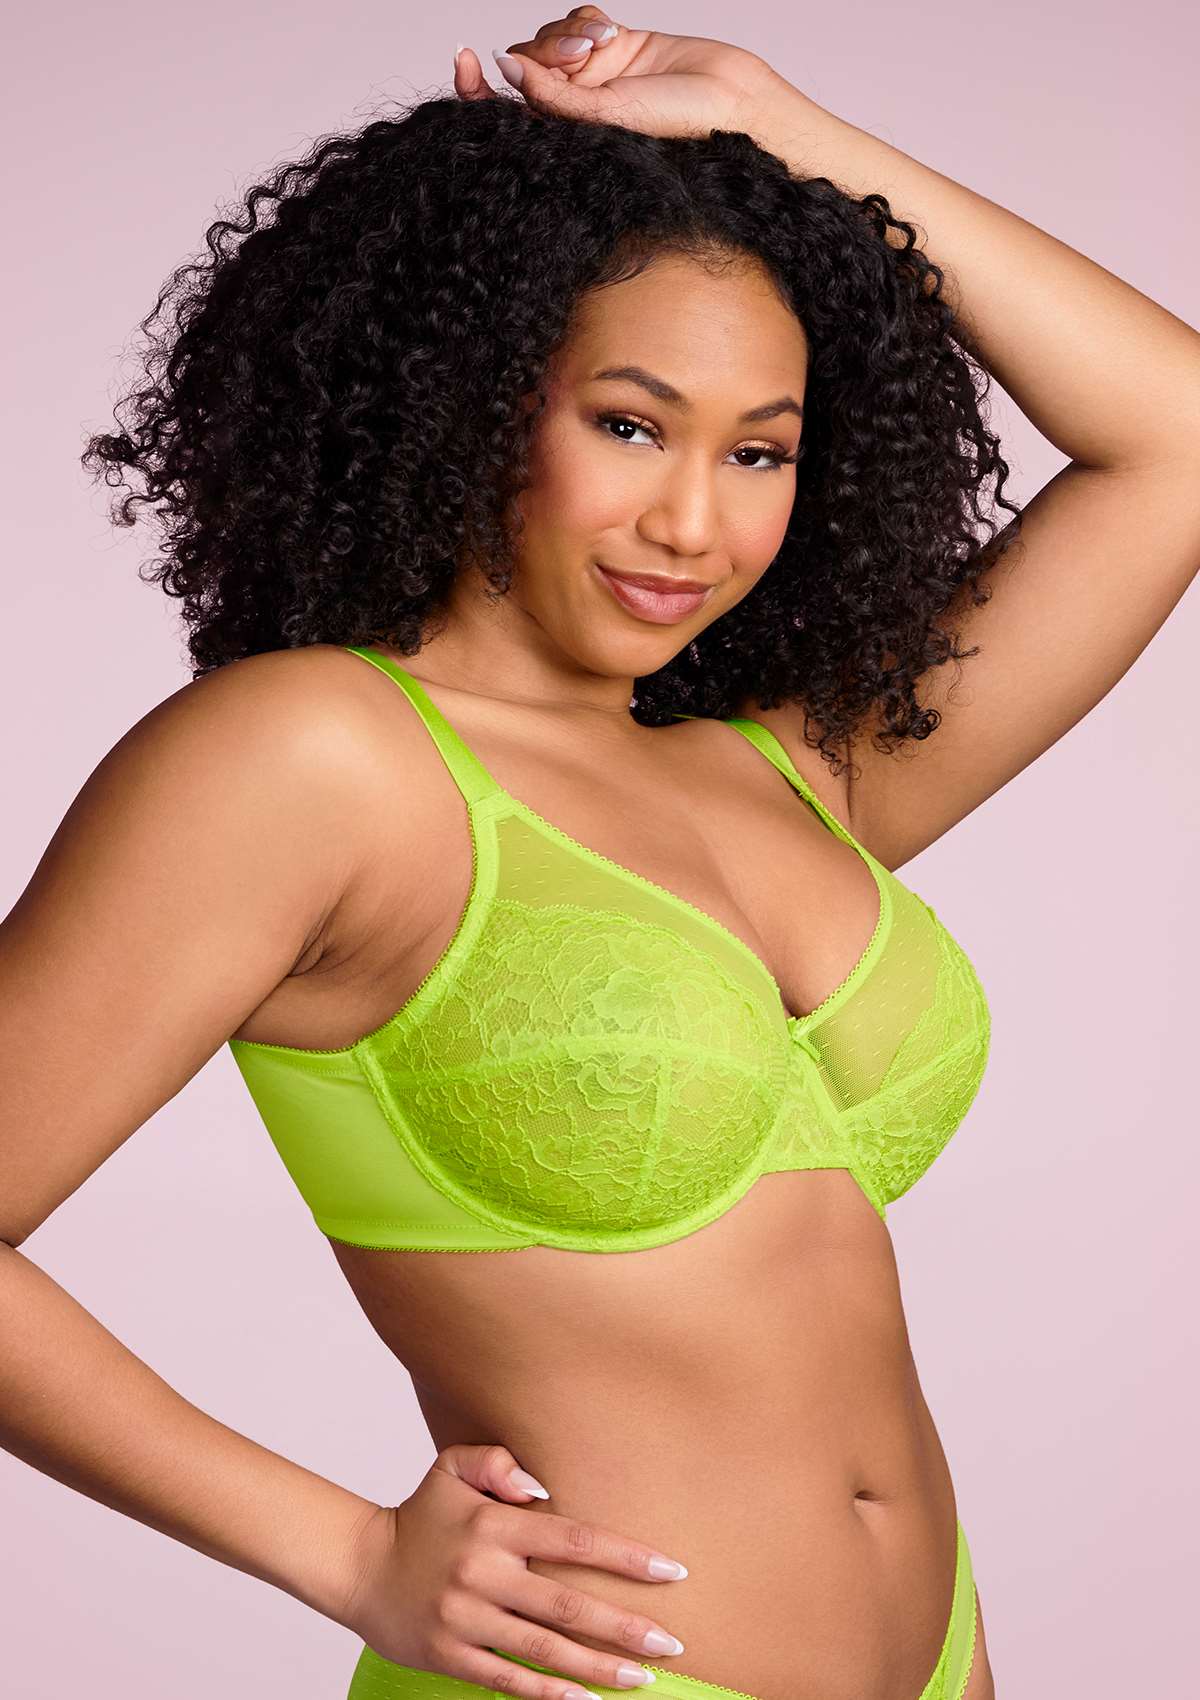 HSIA Enchante Full Cup Minimizing Bra: Supportive Unlined Lace Bra - Lime Green / 44 / C